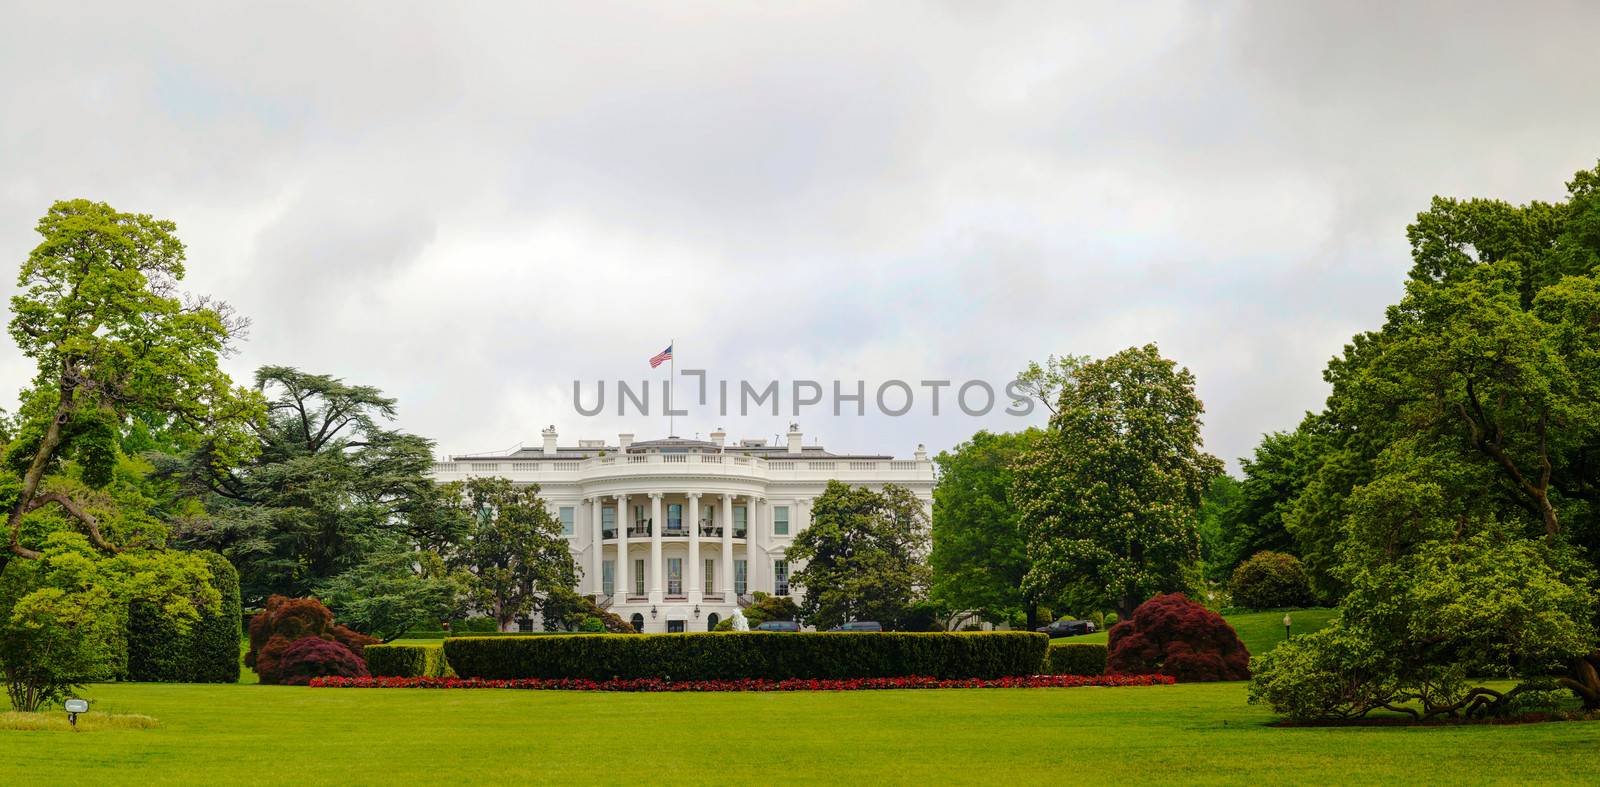 The White House building in Washington, DC by AndreyKr